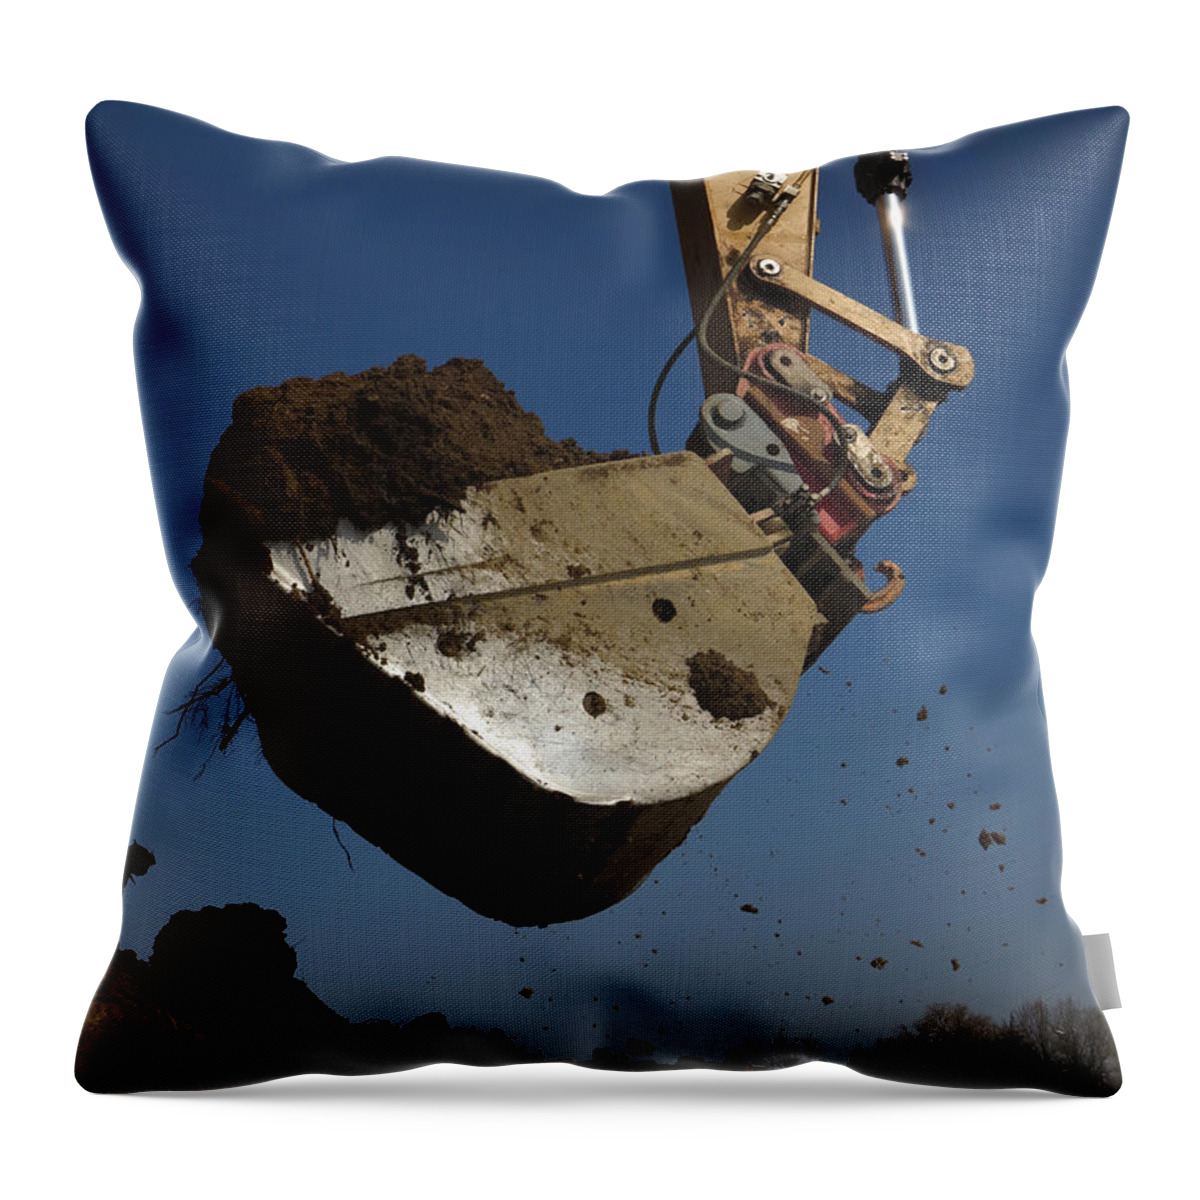 Construction Machinery Throw Pillow featuring the photograph Mechanical Digger Excavating On A by Rolfo Rolf Brenner